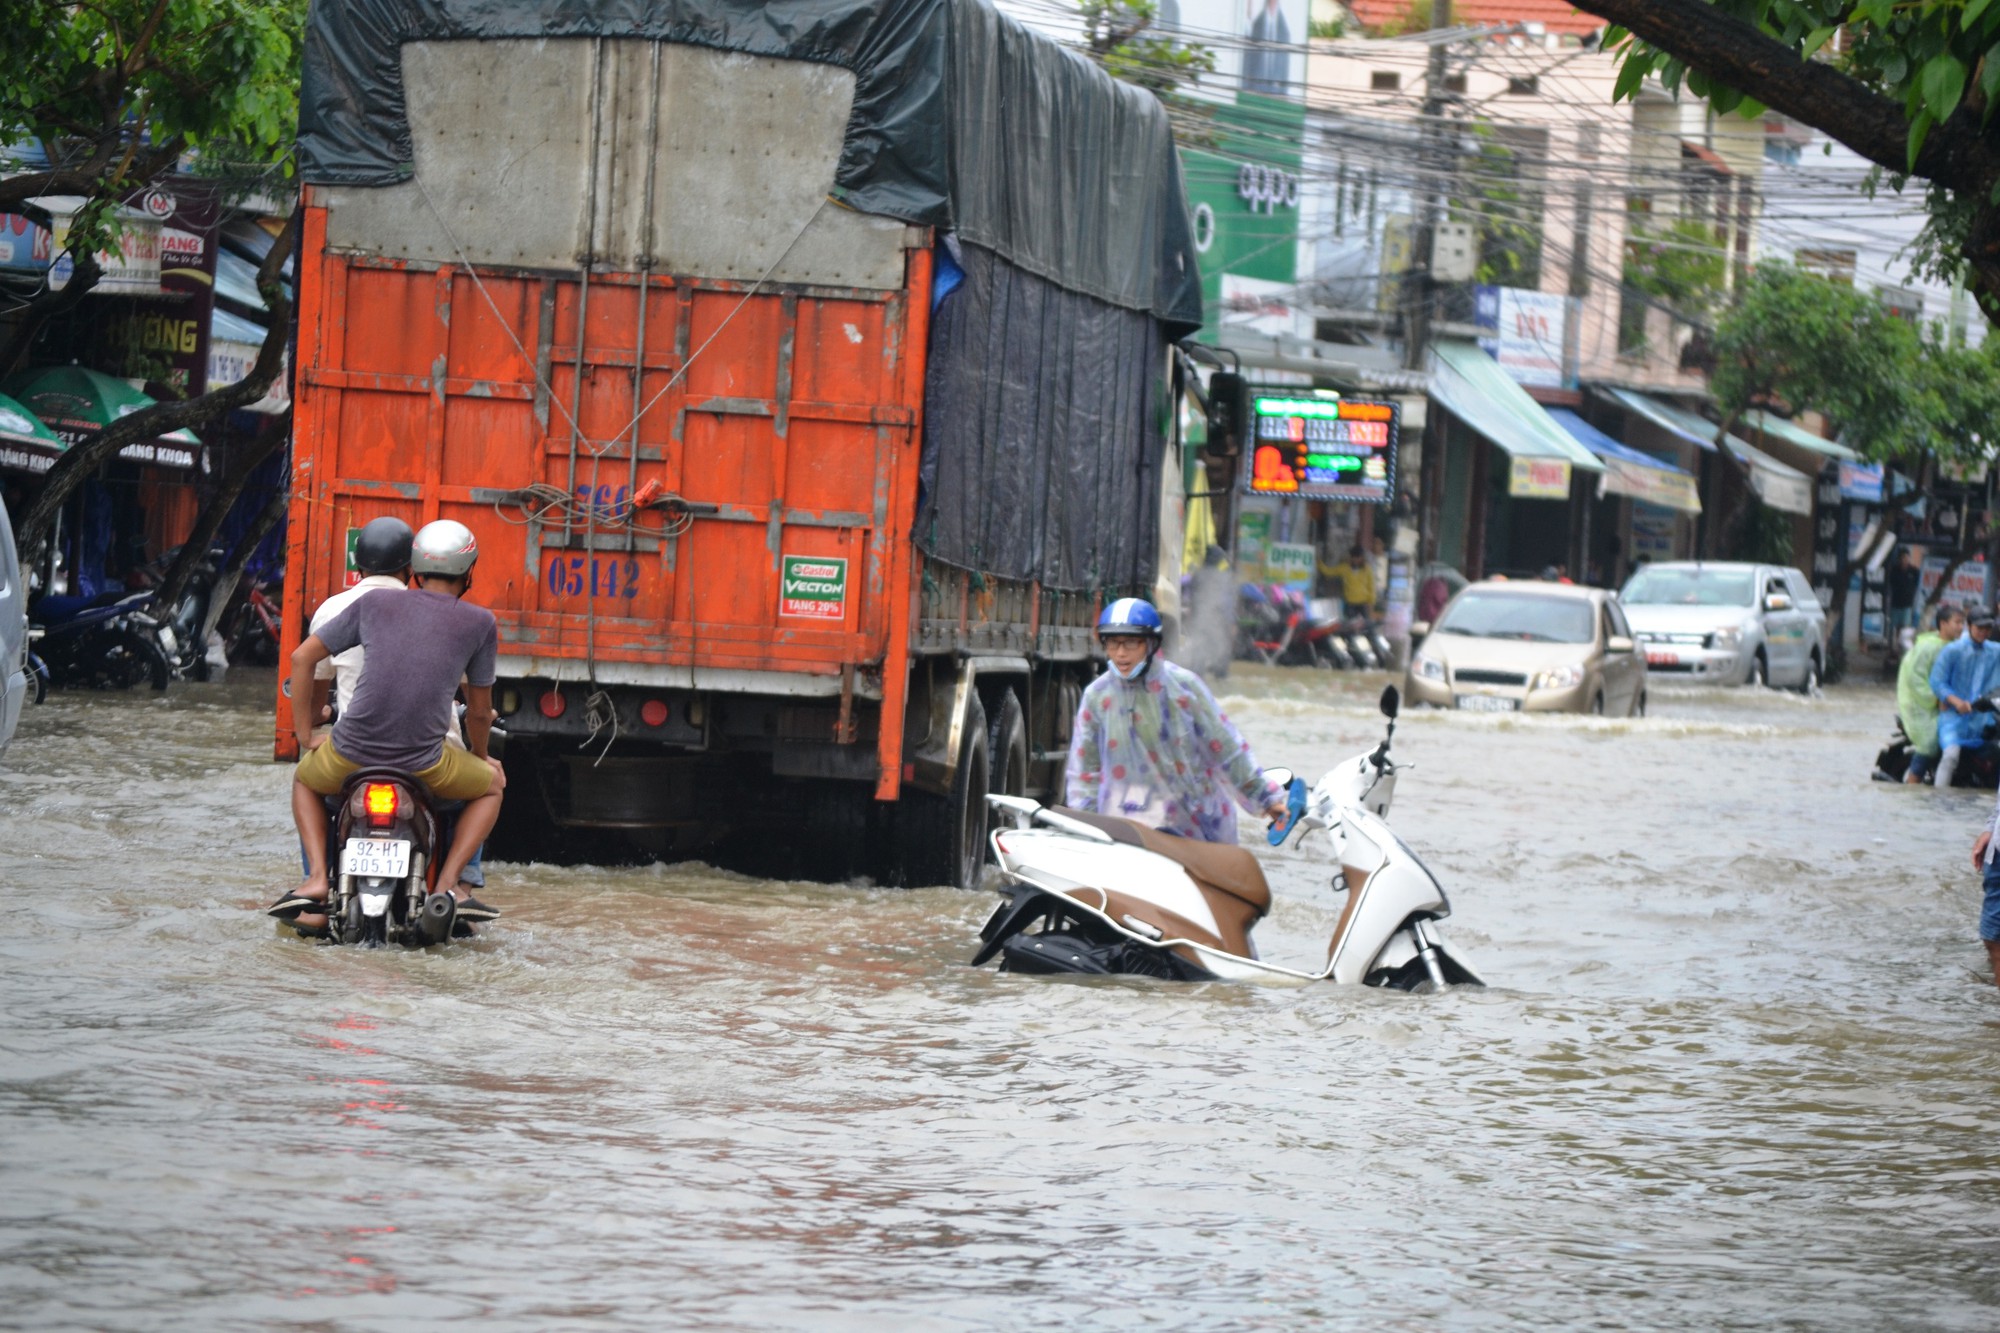 A flooded street in the central Vietnamese province of Quang Nam on November 21, 2017. Photo: Tuoi Tre